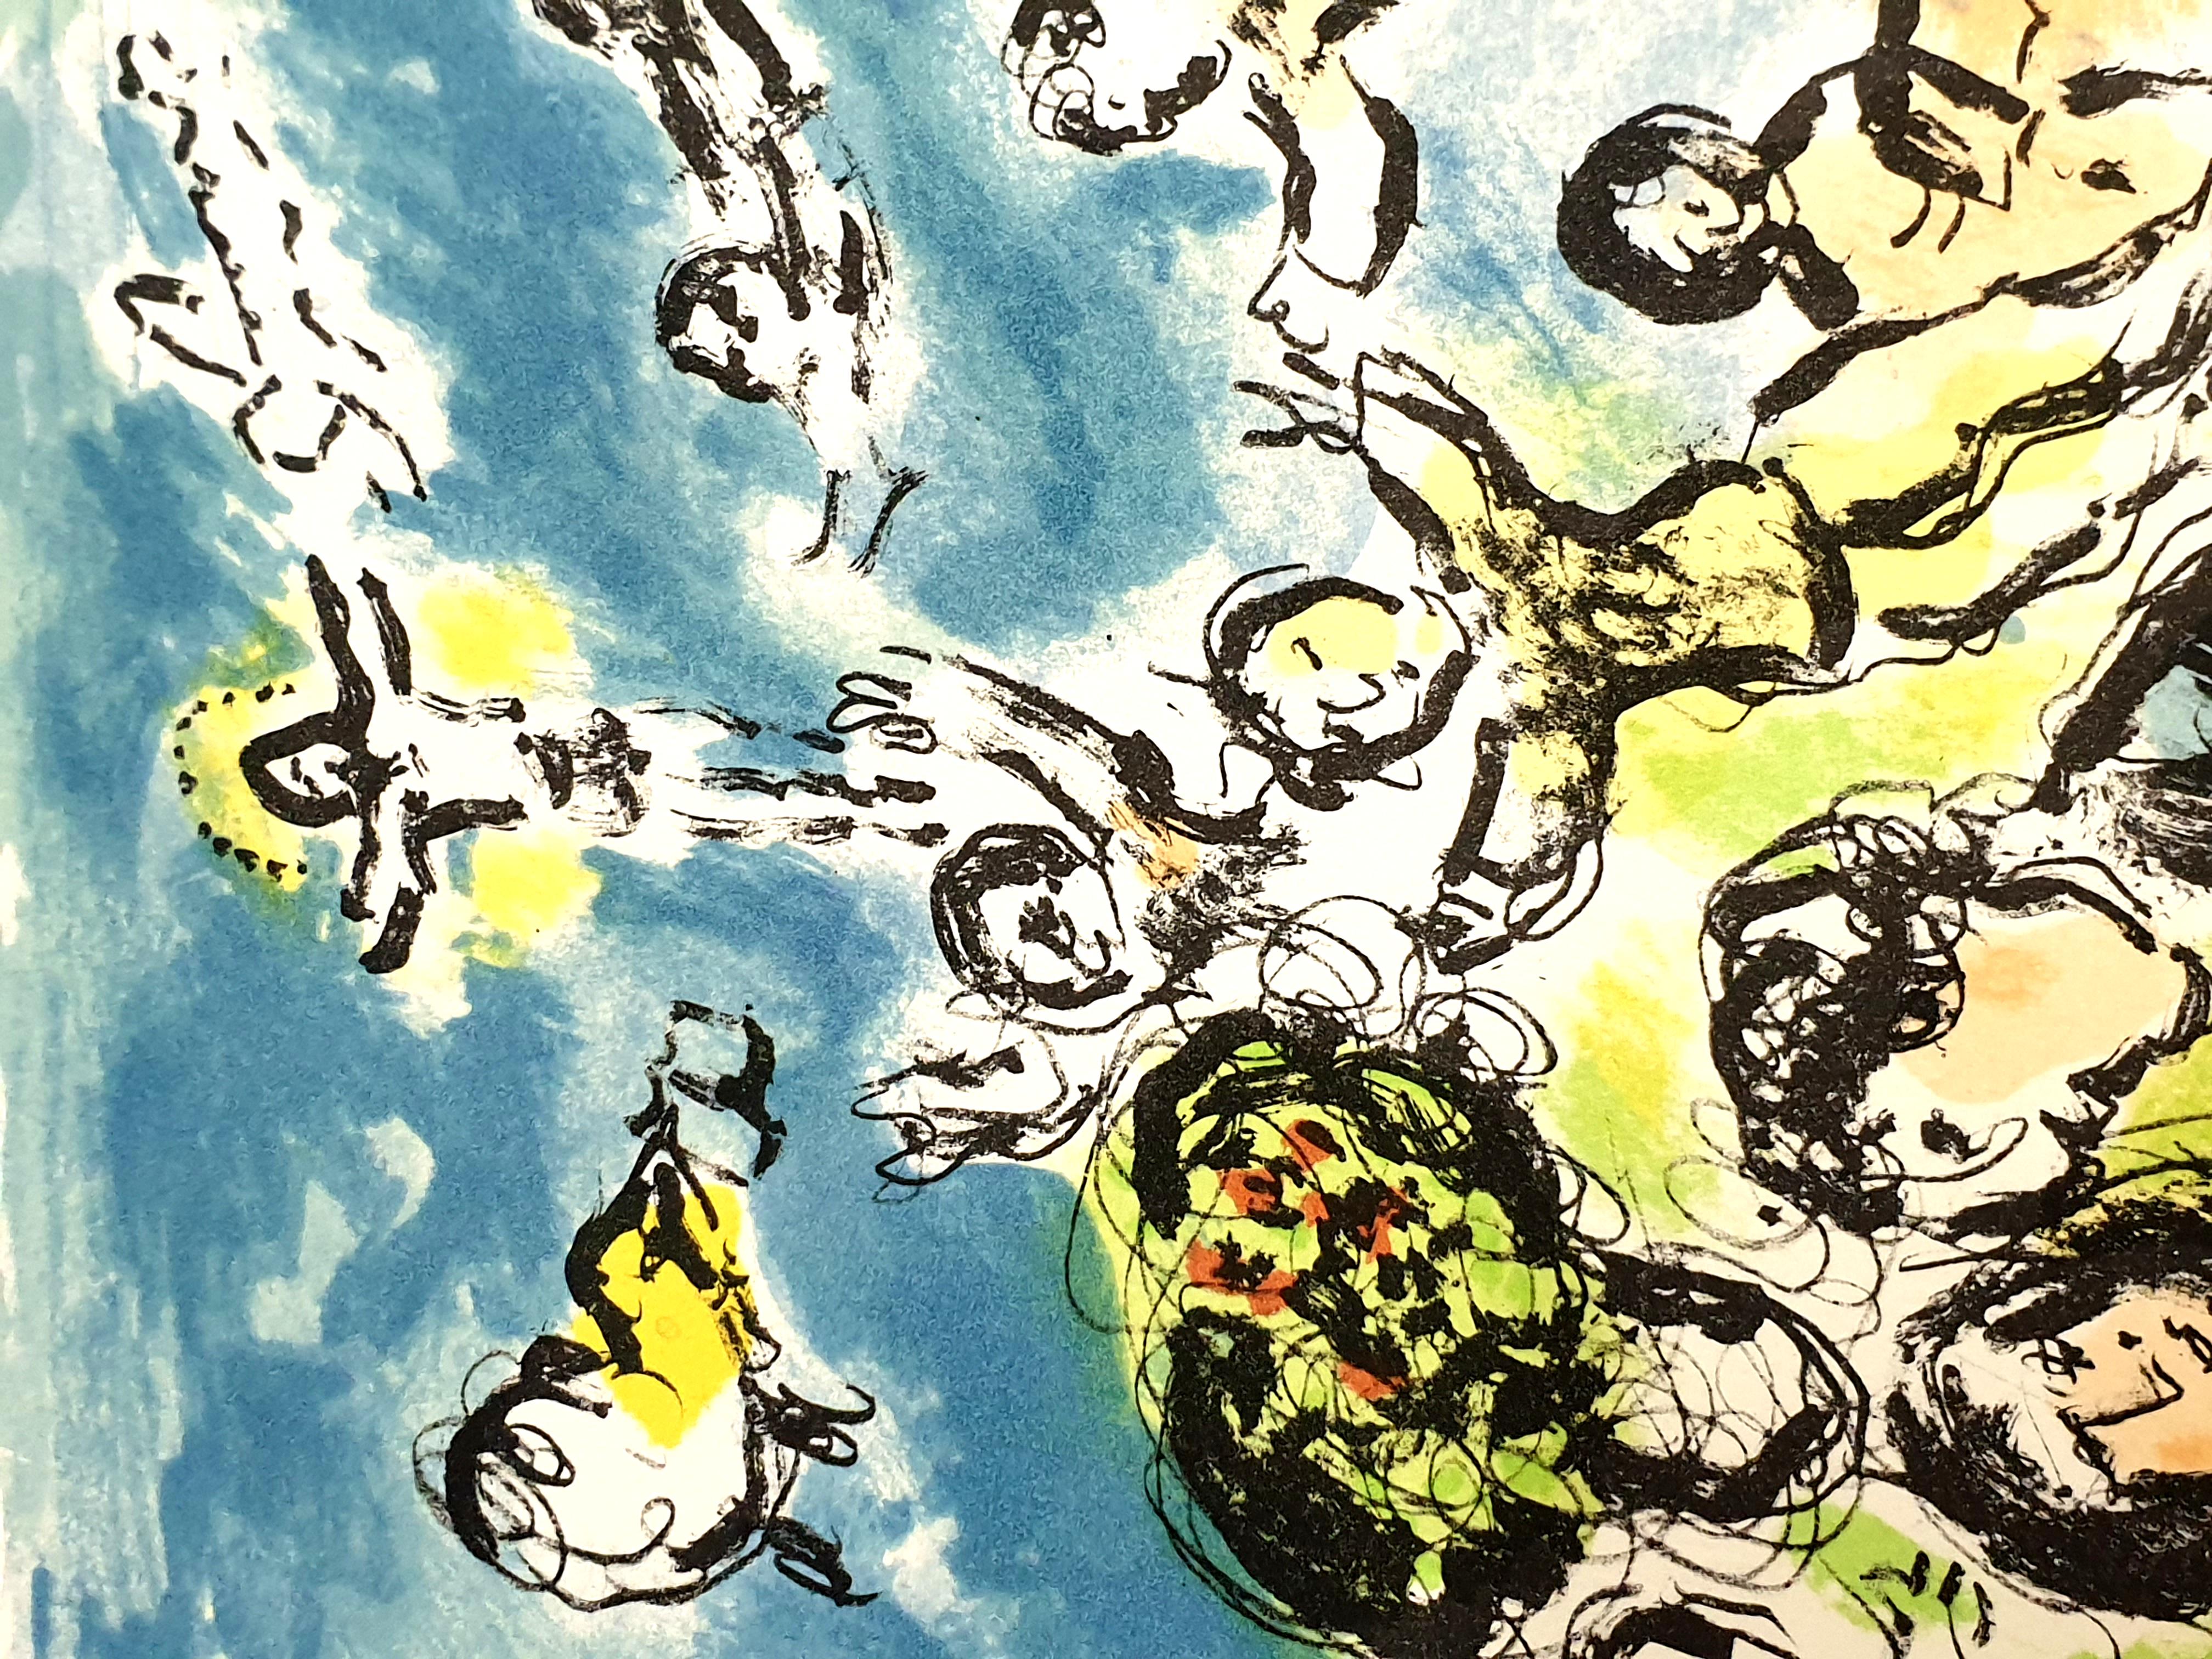 Marc Chagall - Summer's Dream - Original Handsigned Lithograph For Sale 2